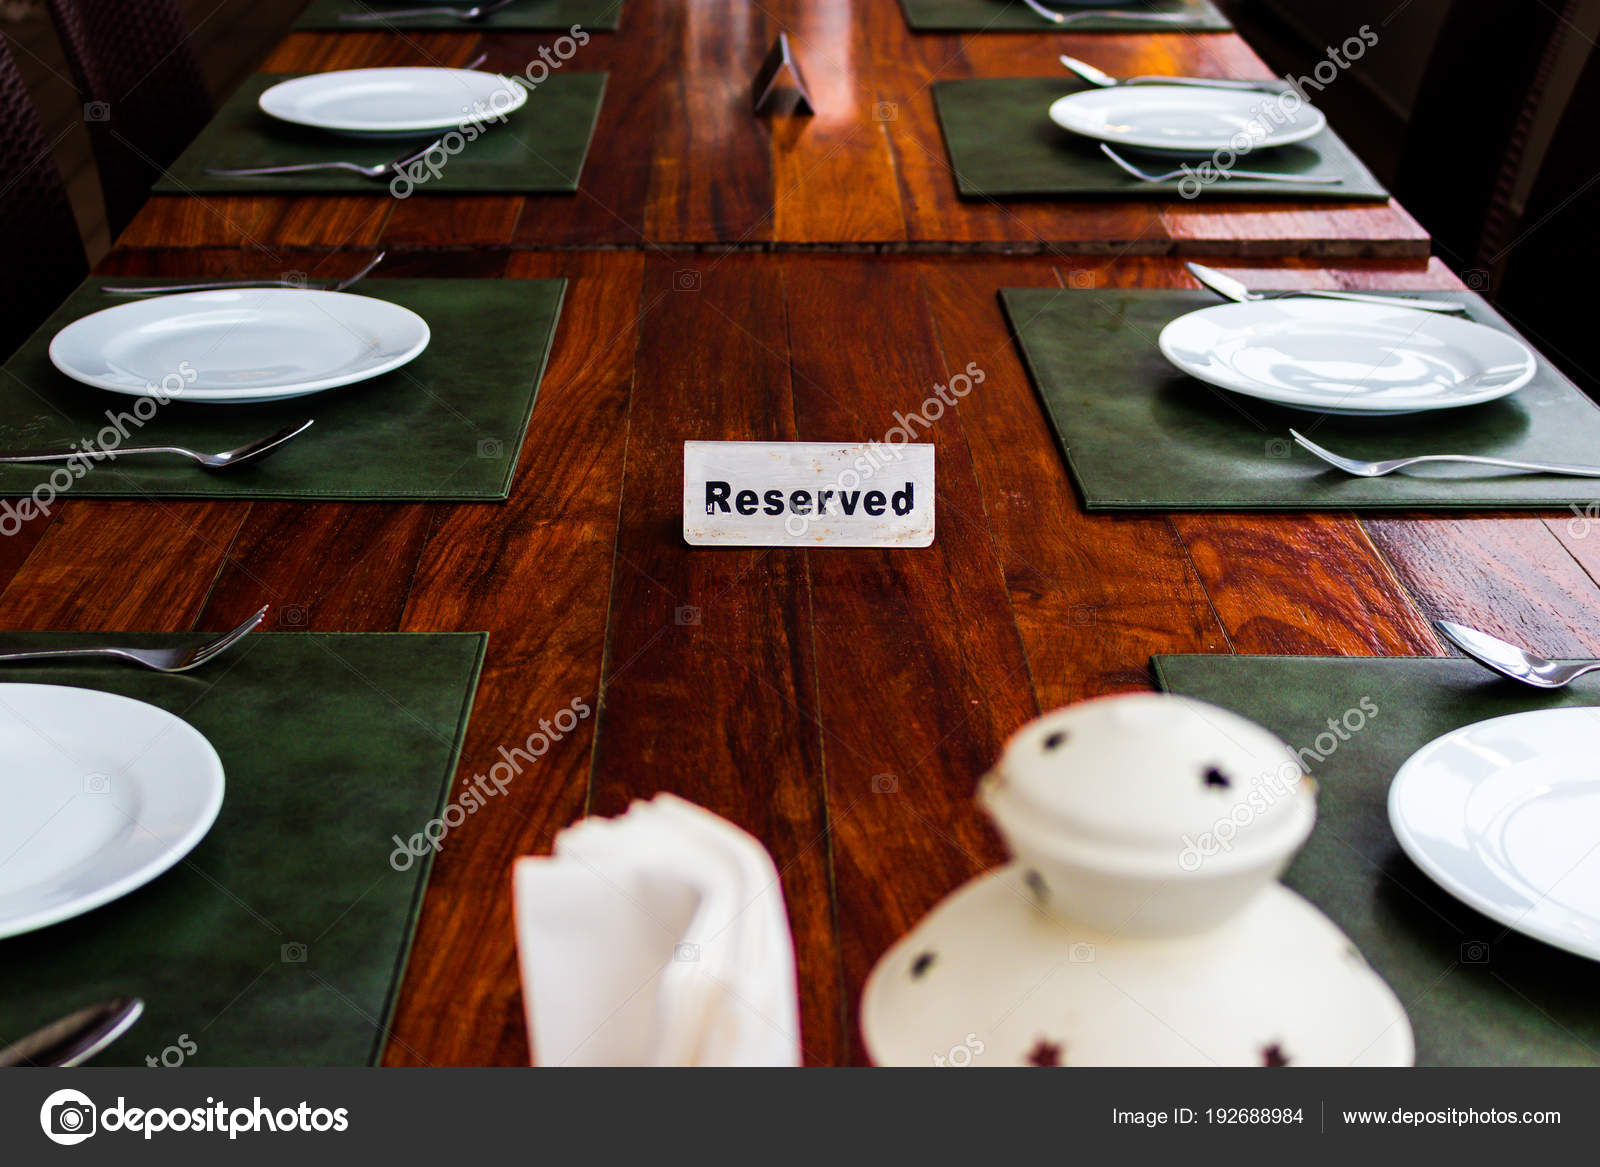 Dining Table Wooden Dining Table Dish Set Stock Photo C Vckeng 192688984